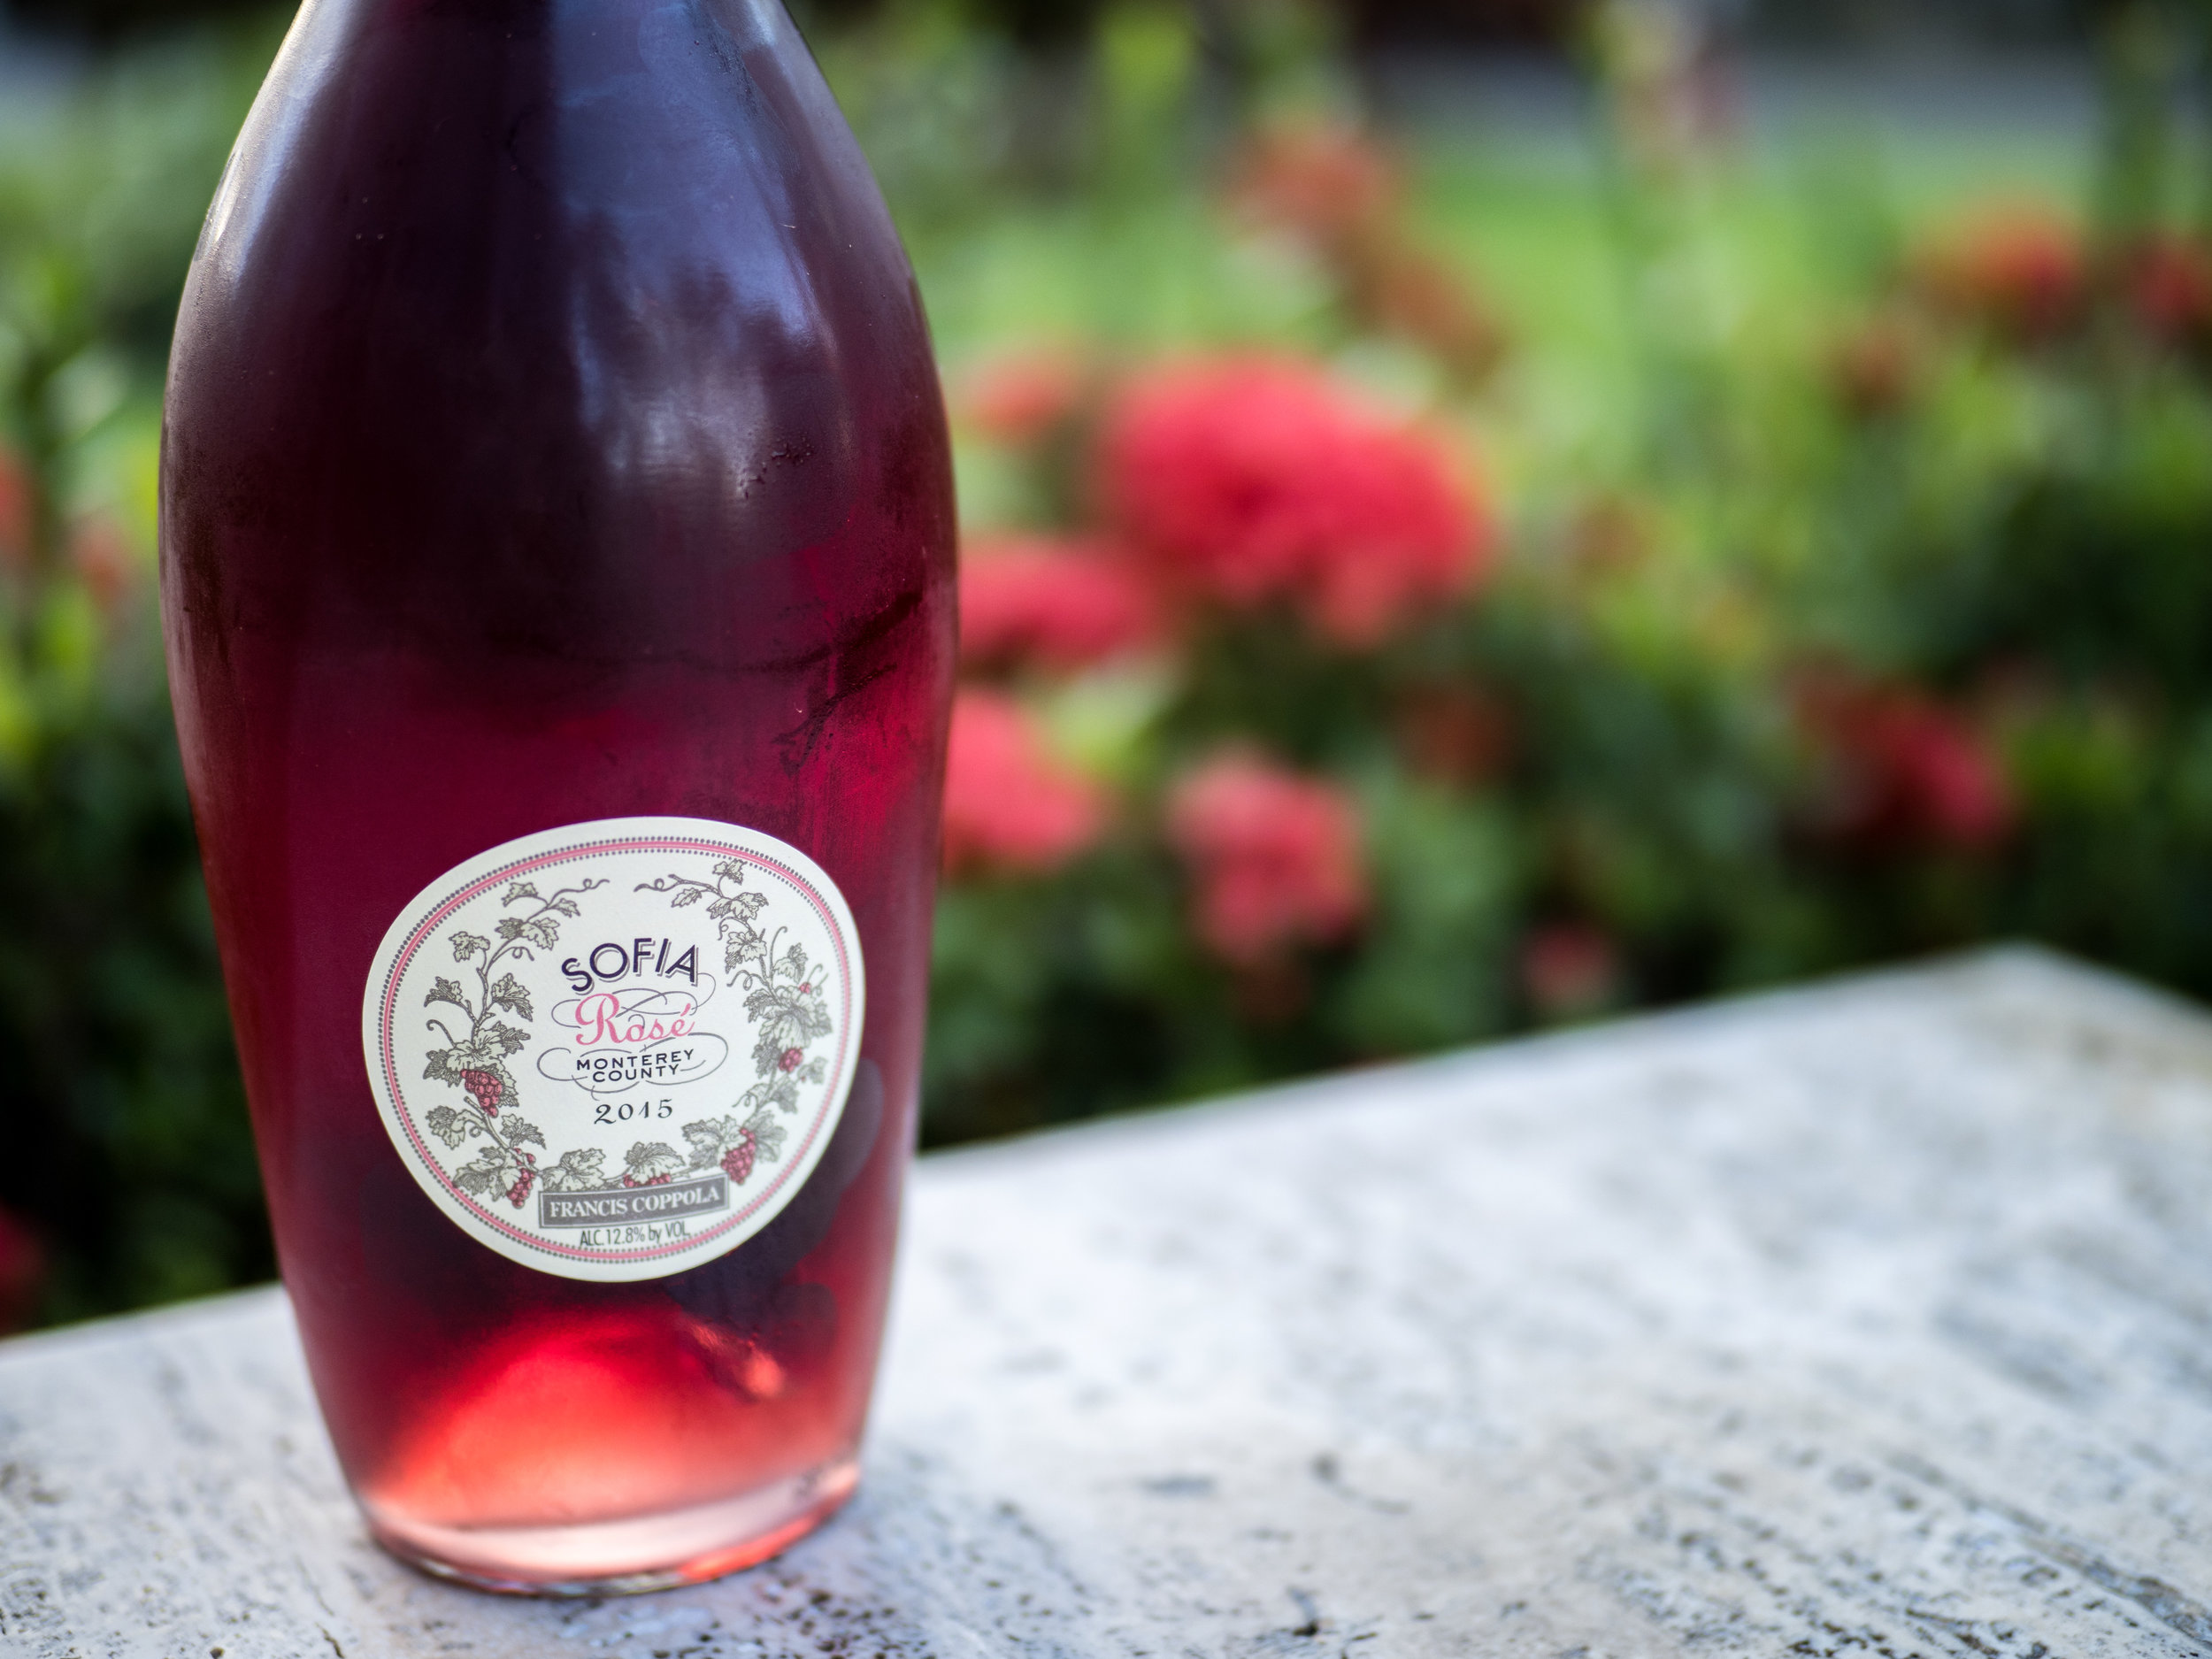 Musings by the Glass - Costco Corner: Everything's Coming Up Rosés